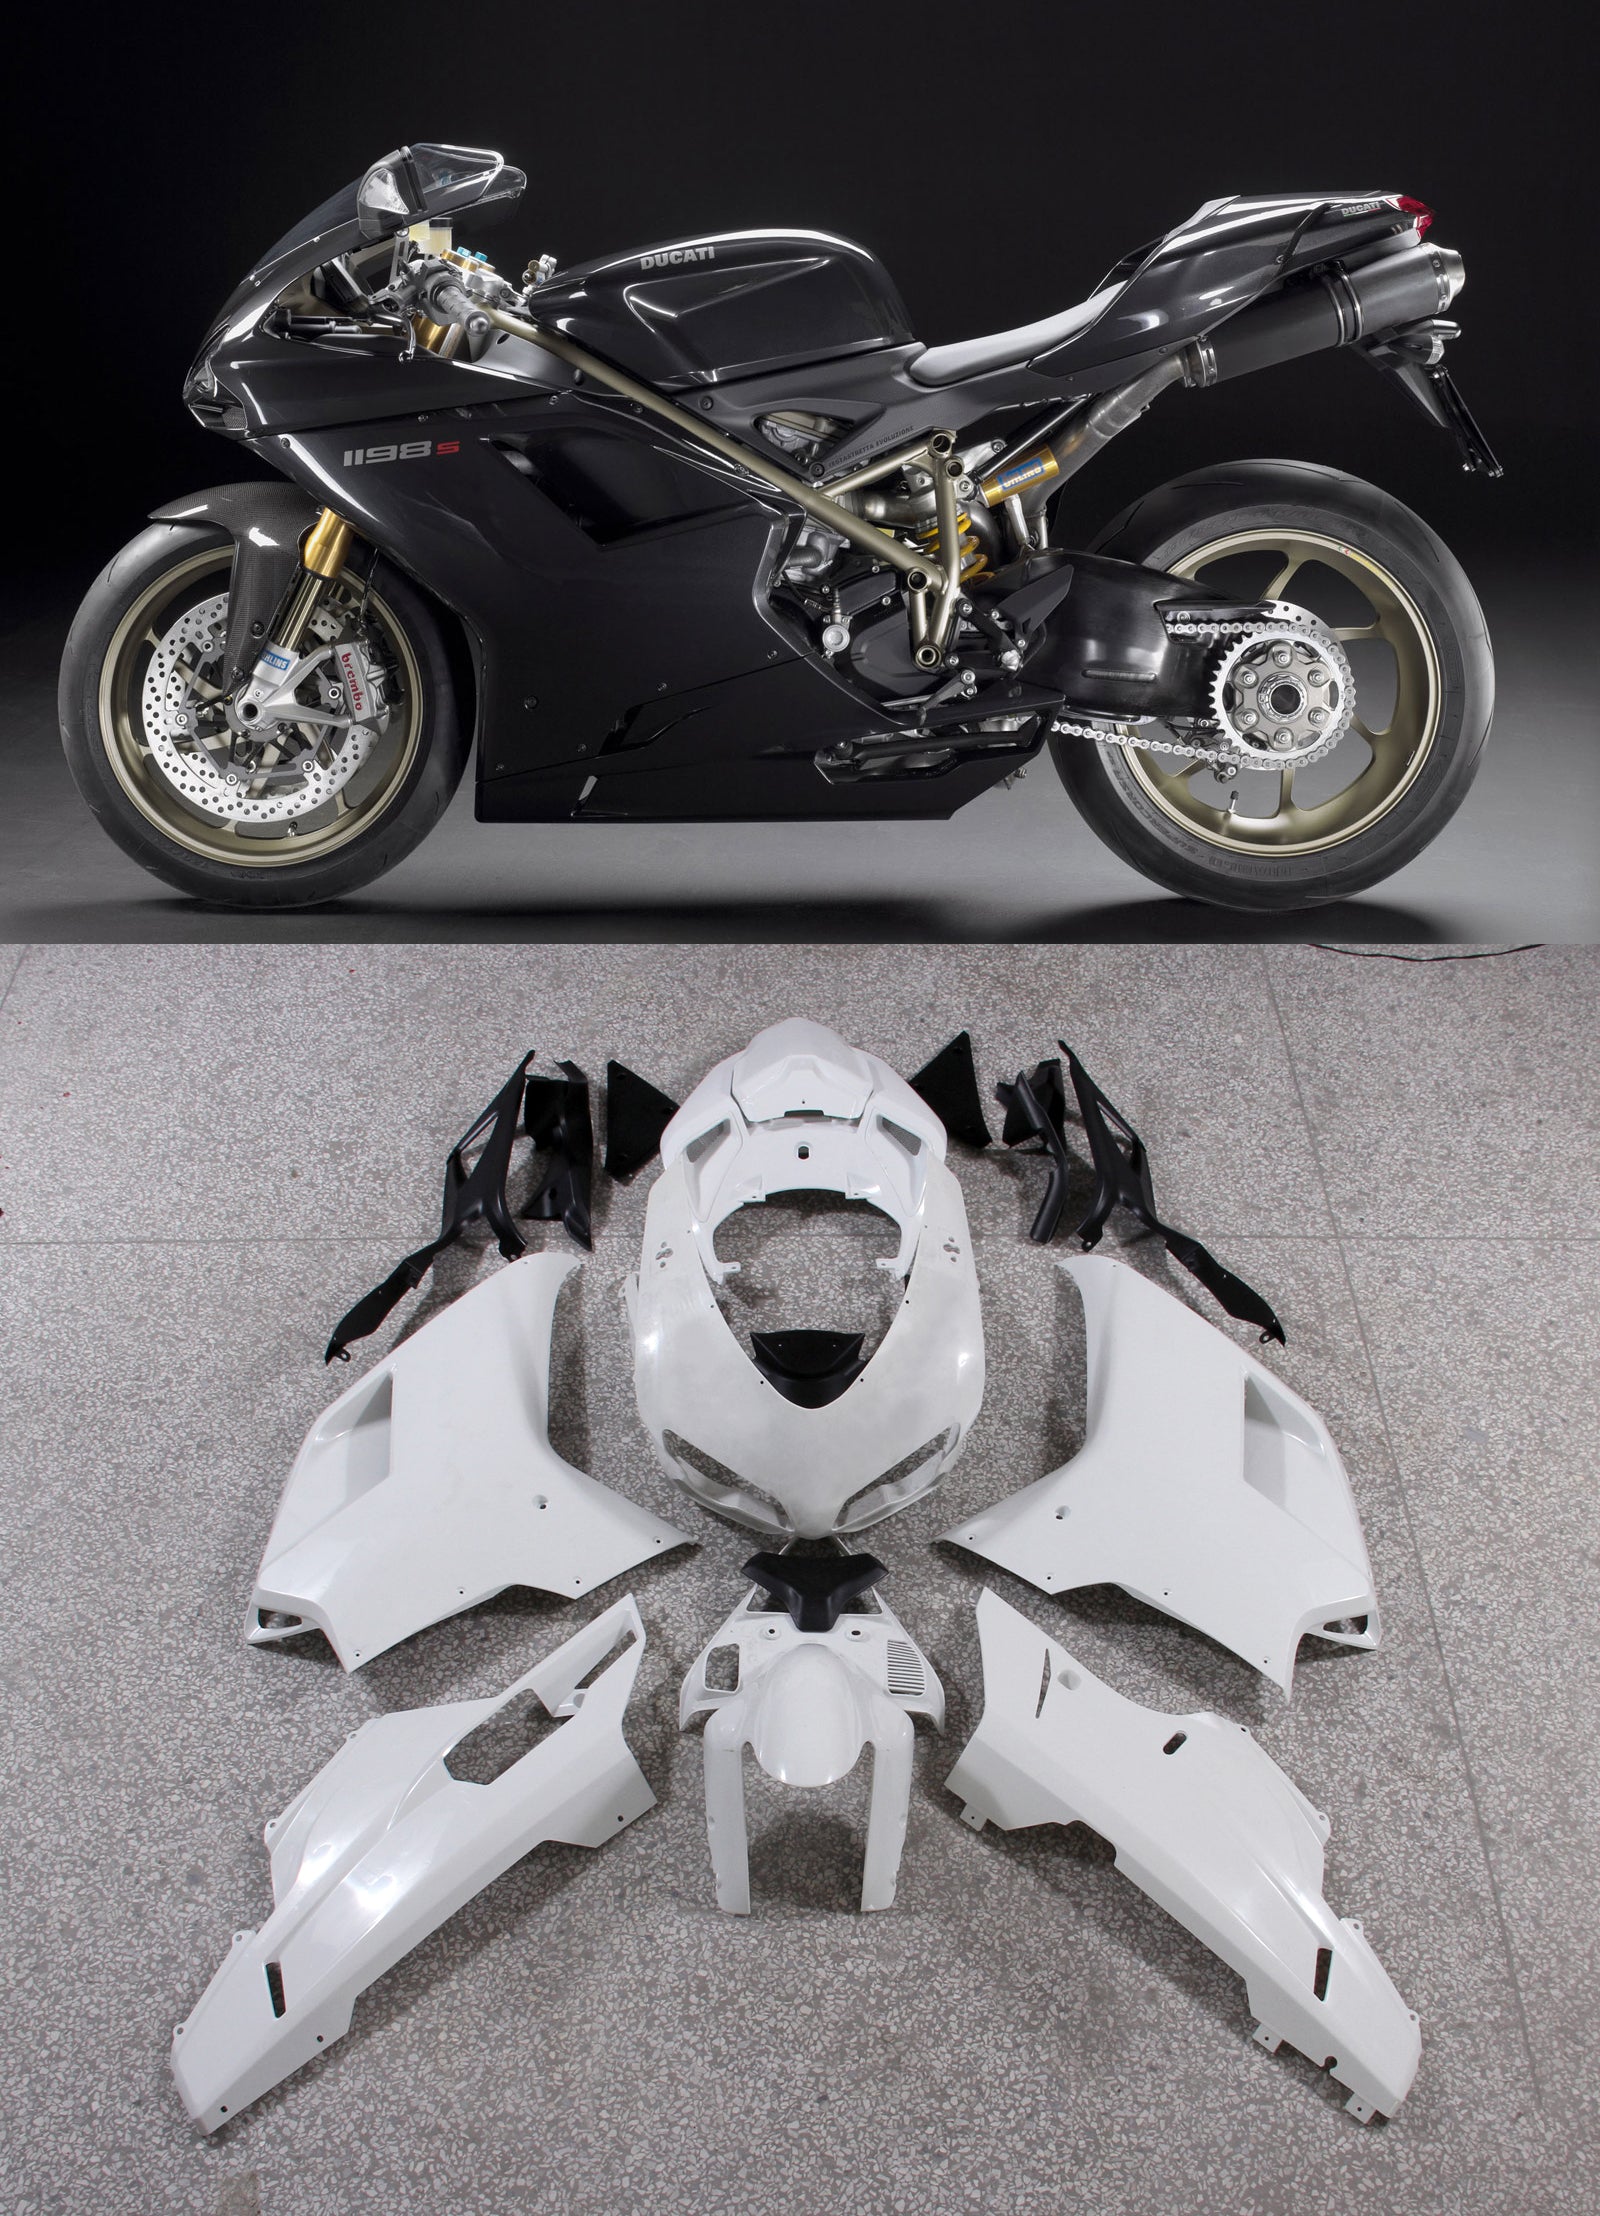 Generic Fit For Ducati 1098 1198 848 (2007-2011) Bodywork Fairing ABS Injection Mold 17 Style